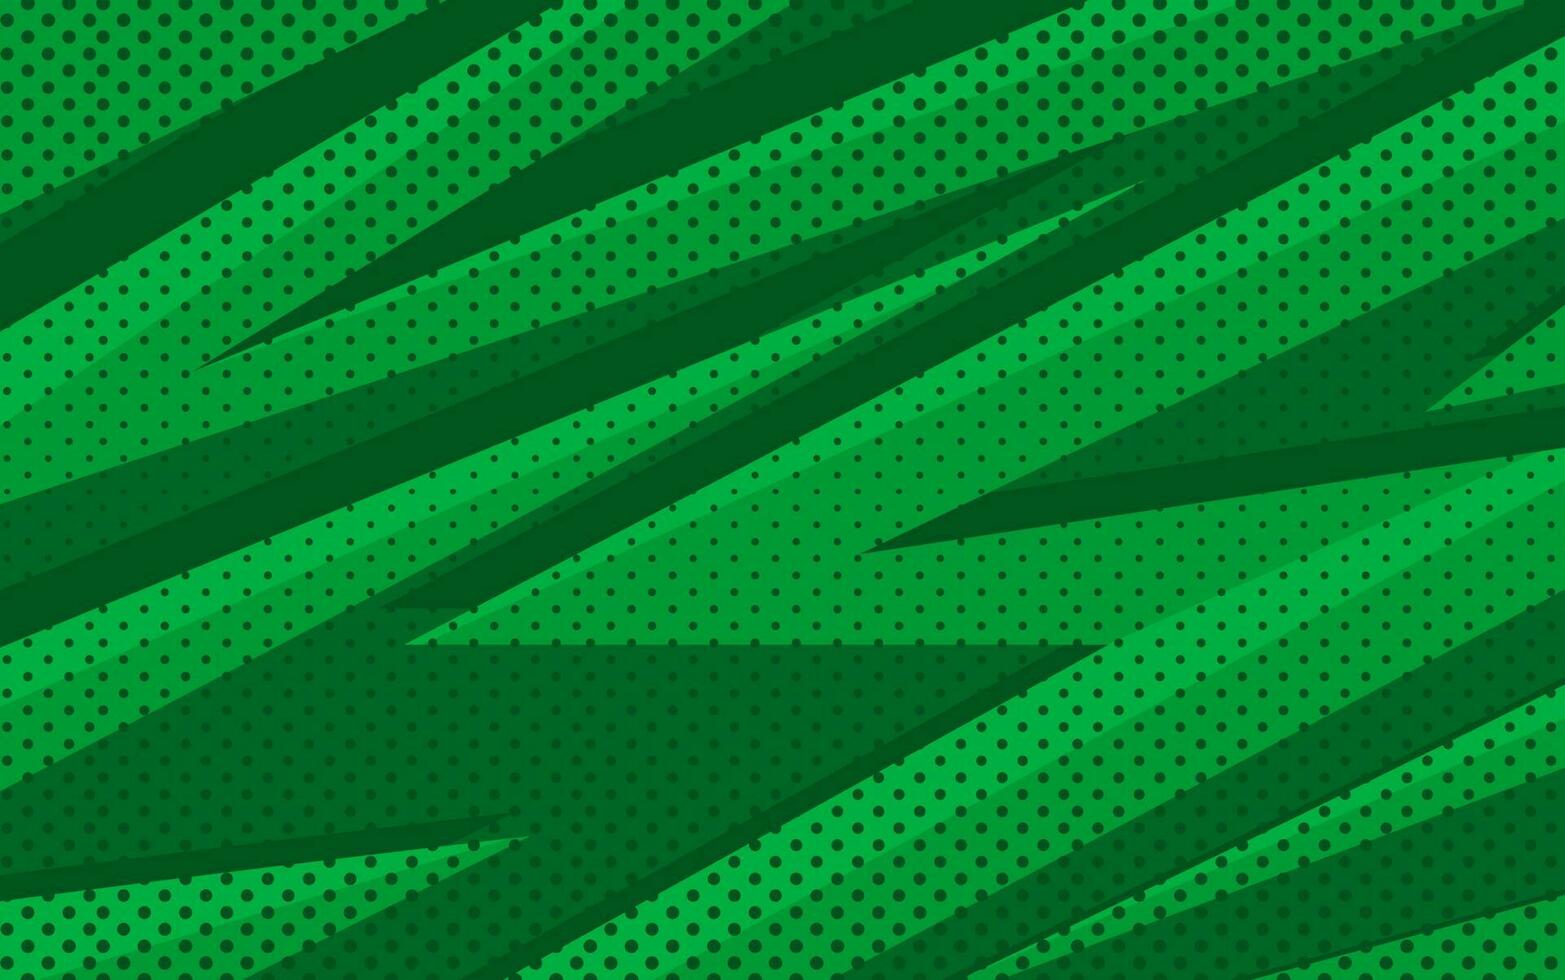 Green abstract background with dot pattern, for sports, gaming themed design vector